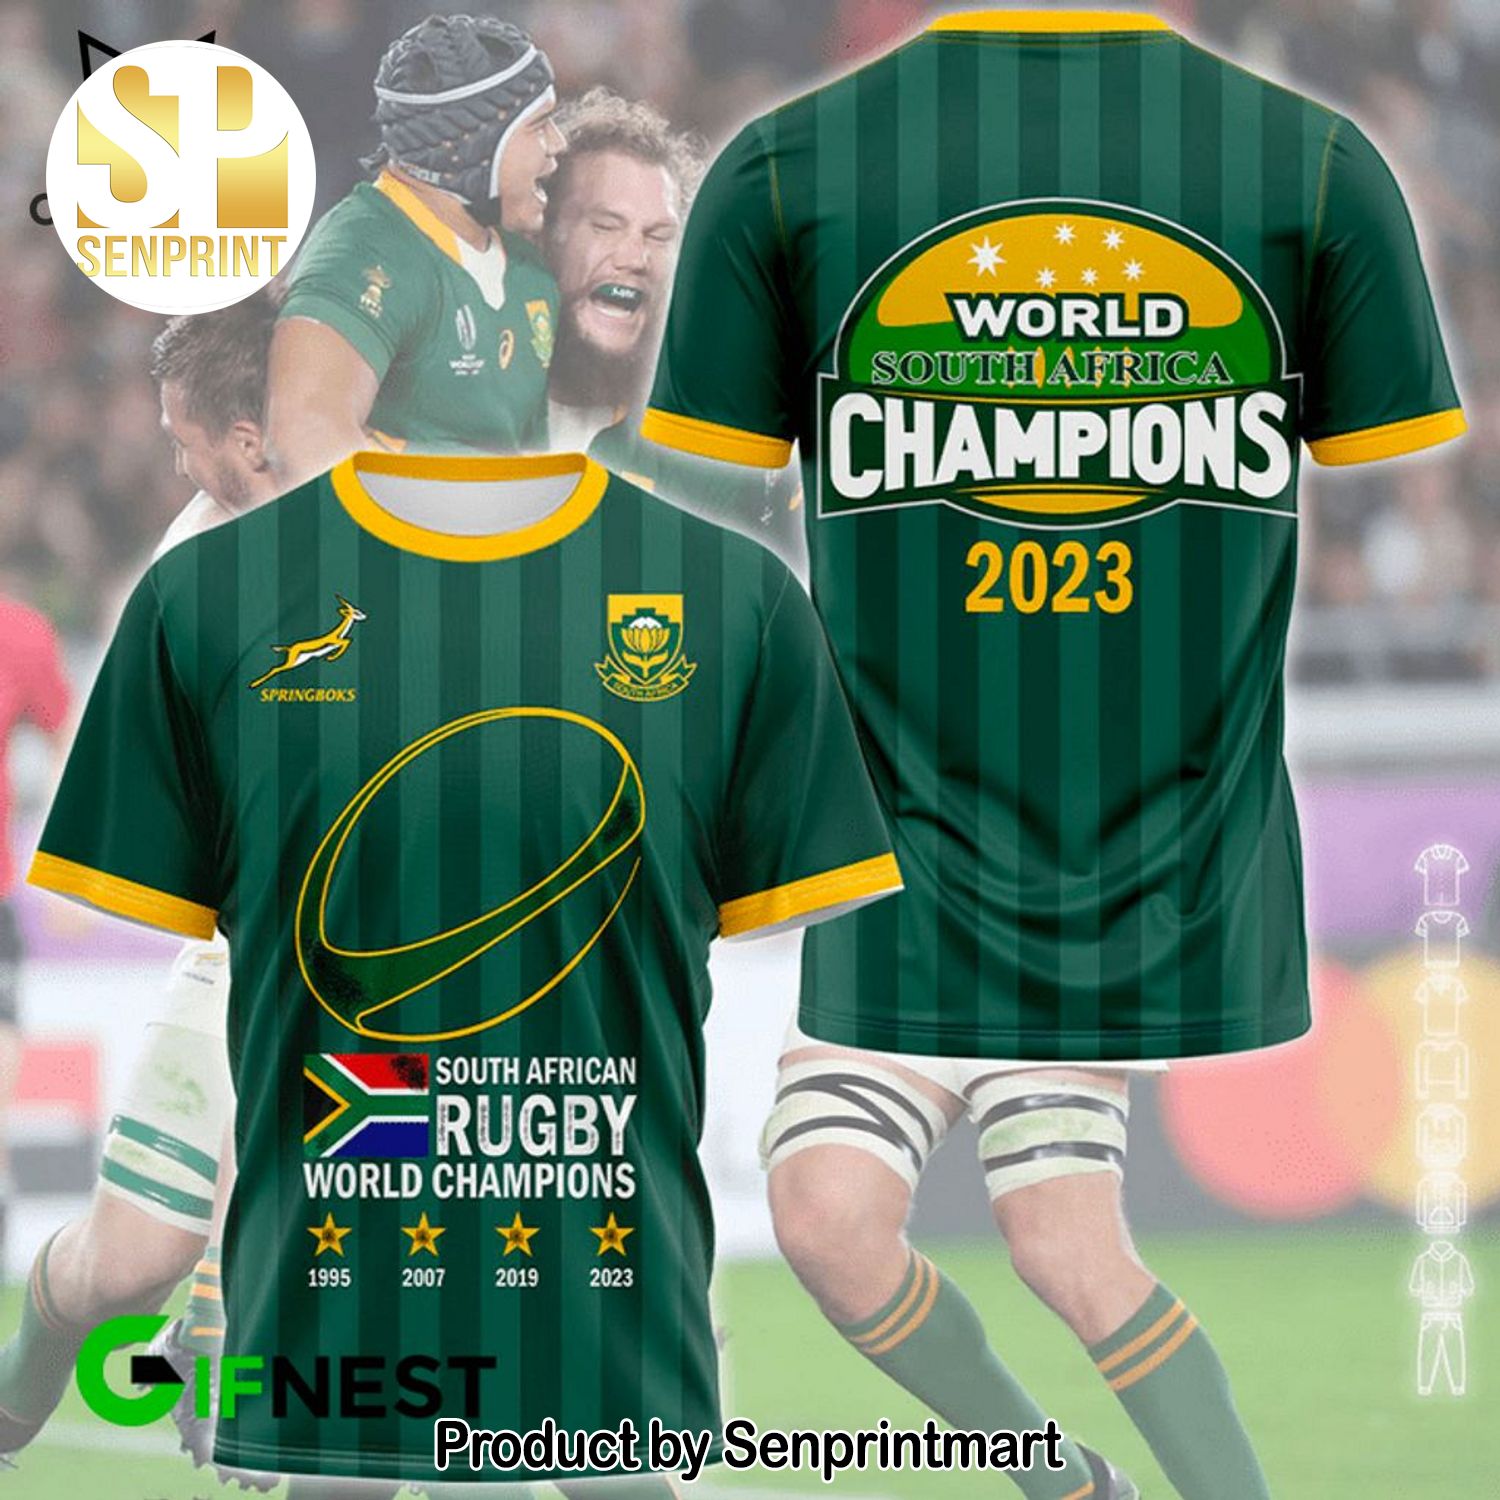 South African Rugby World Champions Springboks 2023 Green 3D All Over Printed Shirt